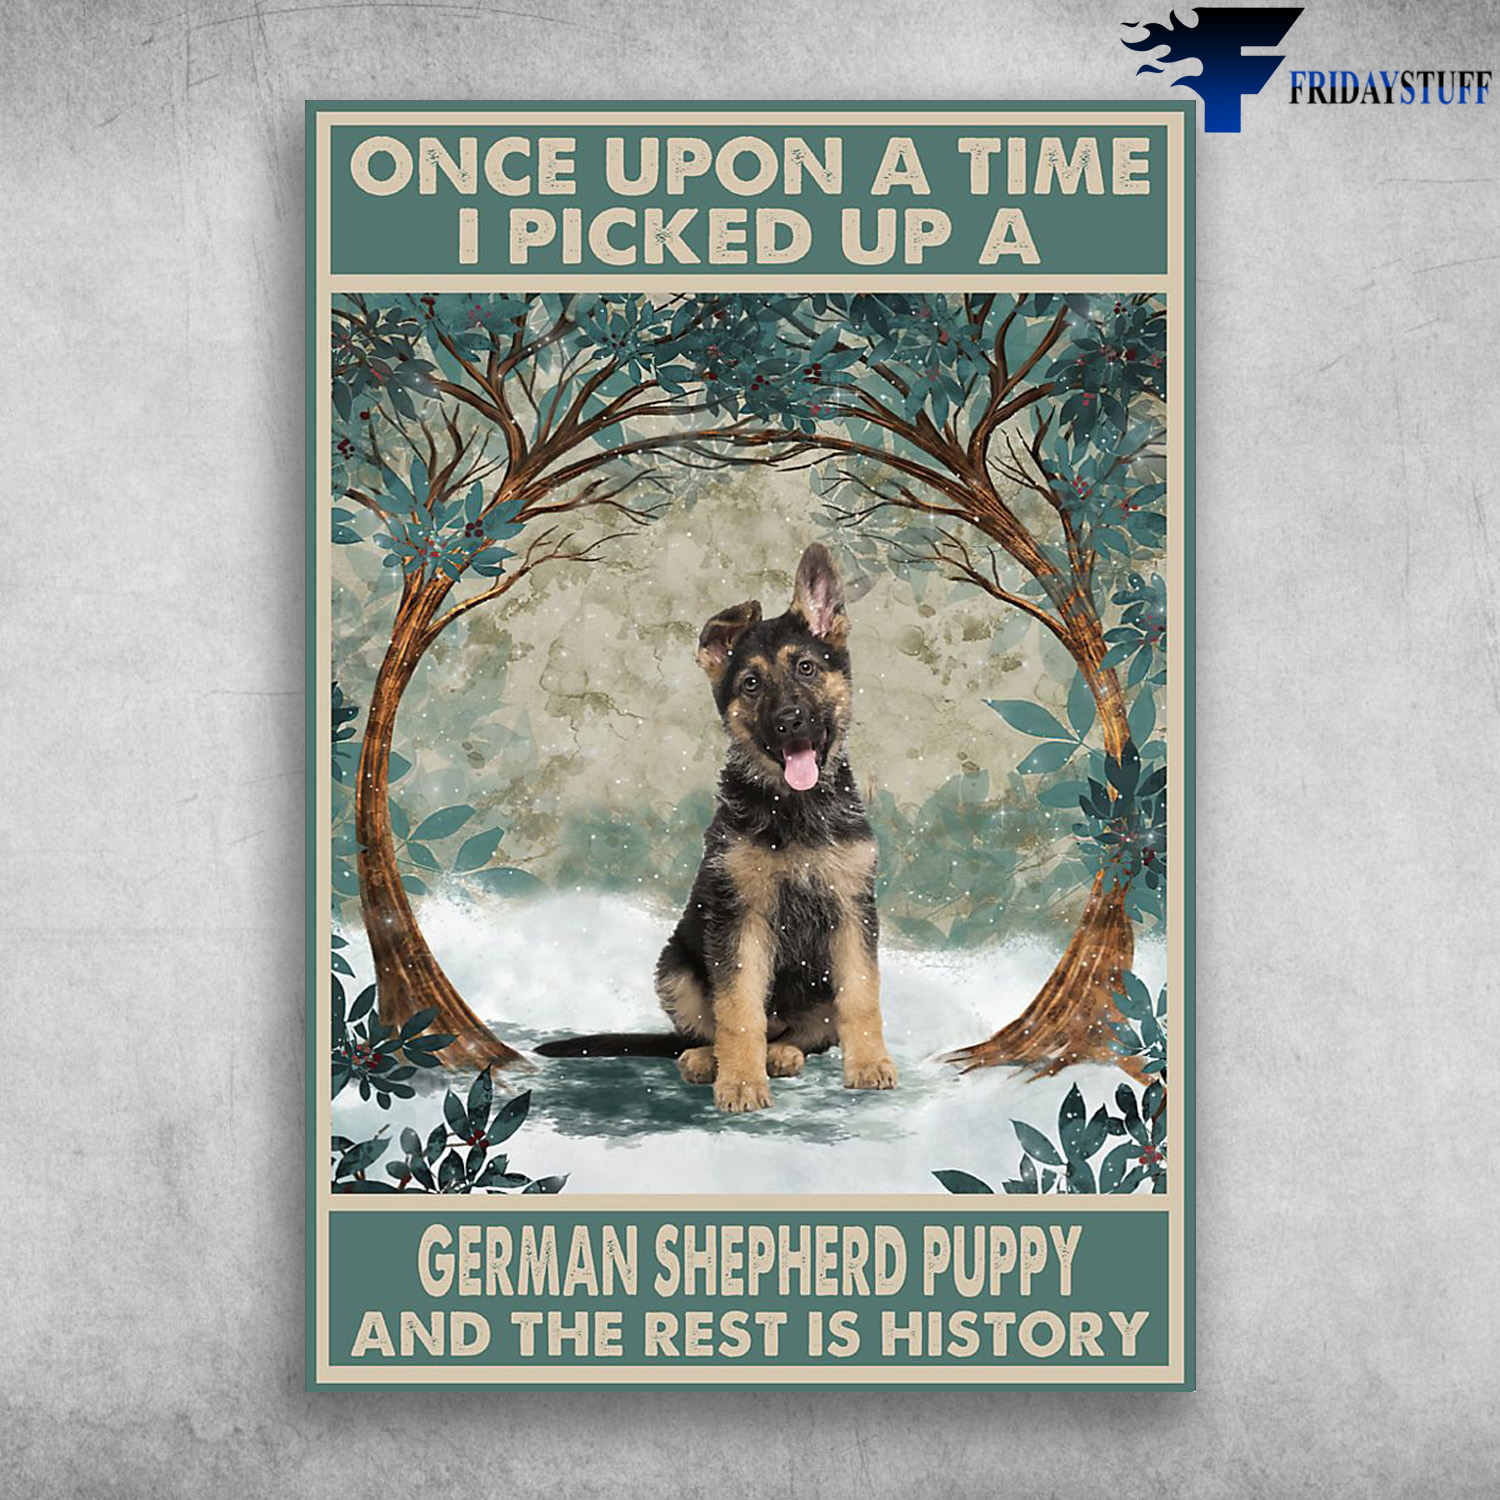 German Shepherd - Once Upon A Time, I Picked Up A German Shepherd Puppy, And The Rest Is History